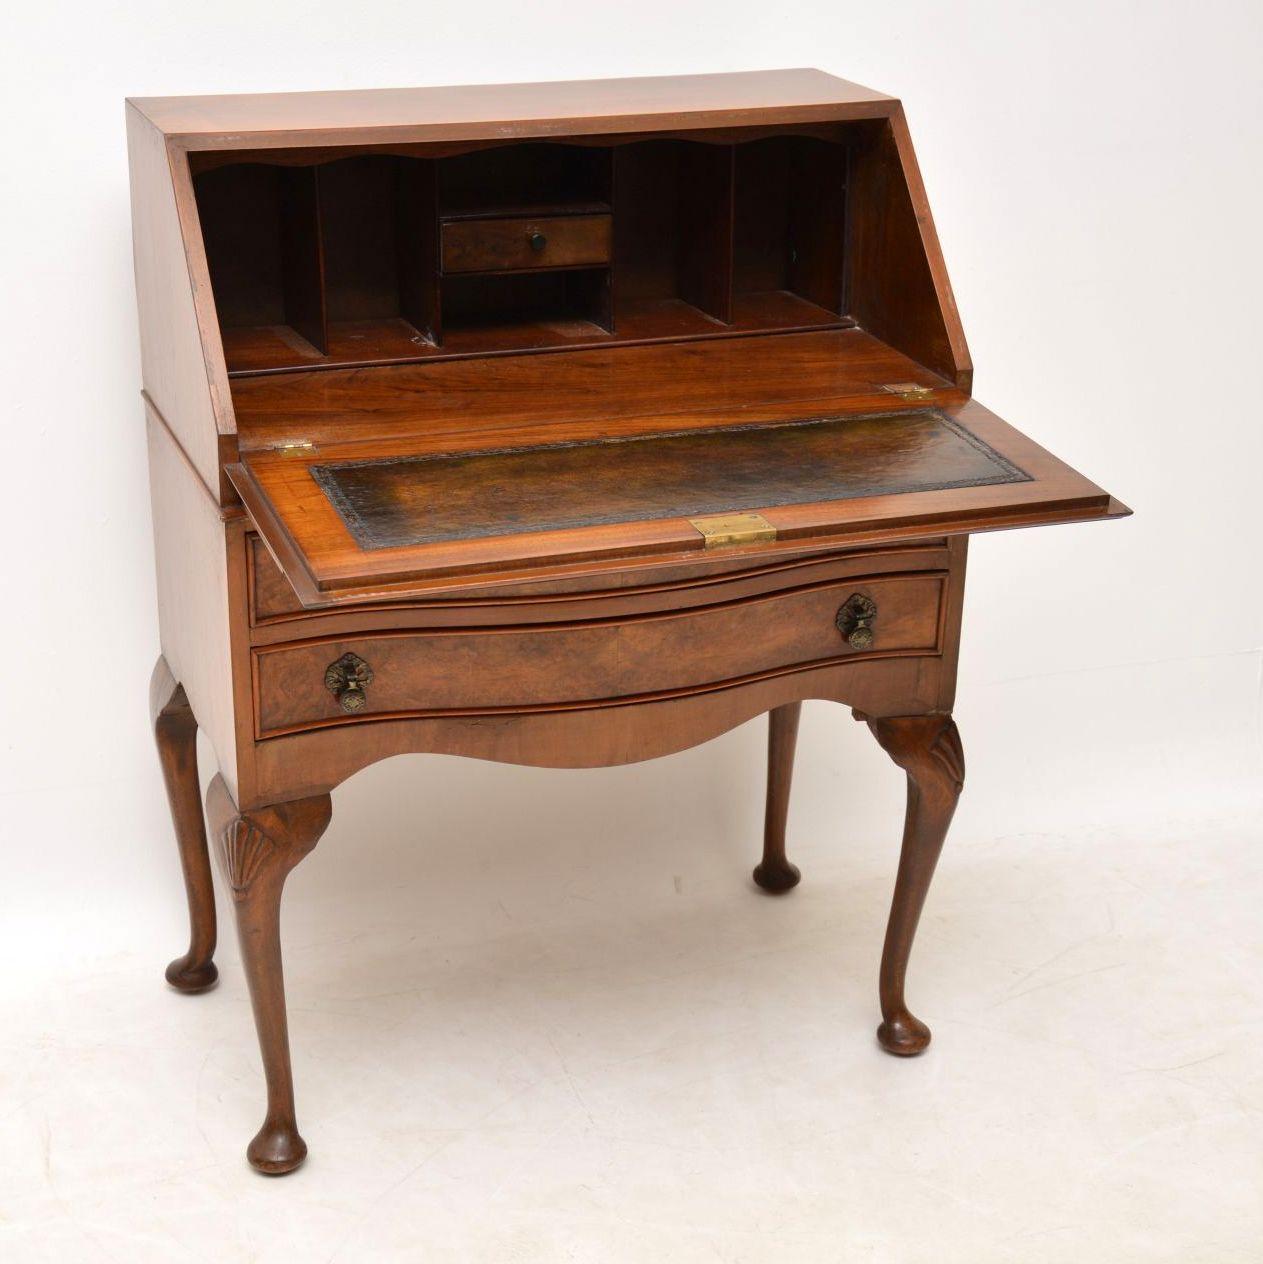 Antique Queen Anne style walnut bureau dating from the 1920s period & in excellent condition. The front section is burr walnut & the flap is crossbanded too. The two drawers are serpentine shaped & have original brass drop handles. The top & sides